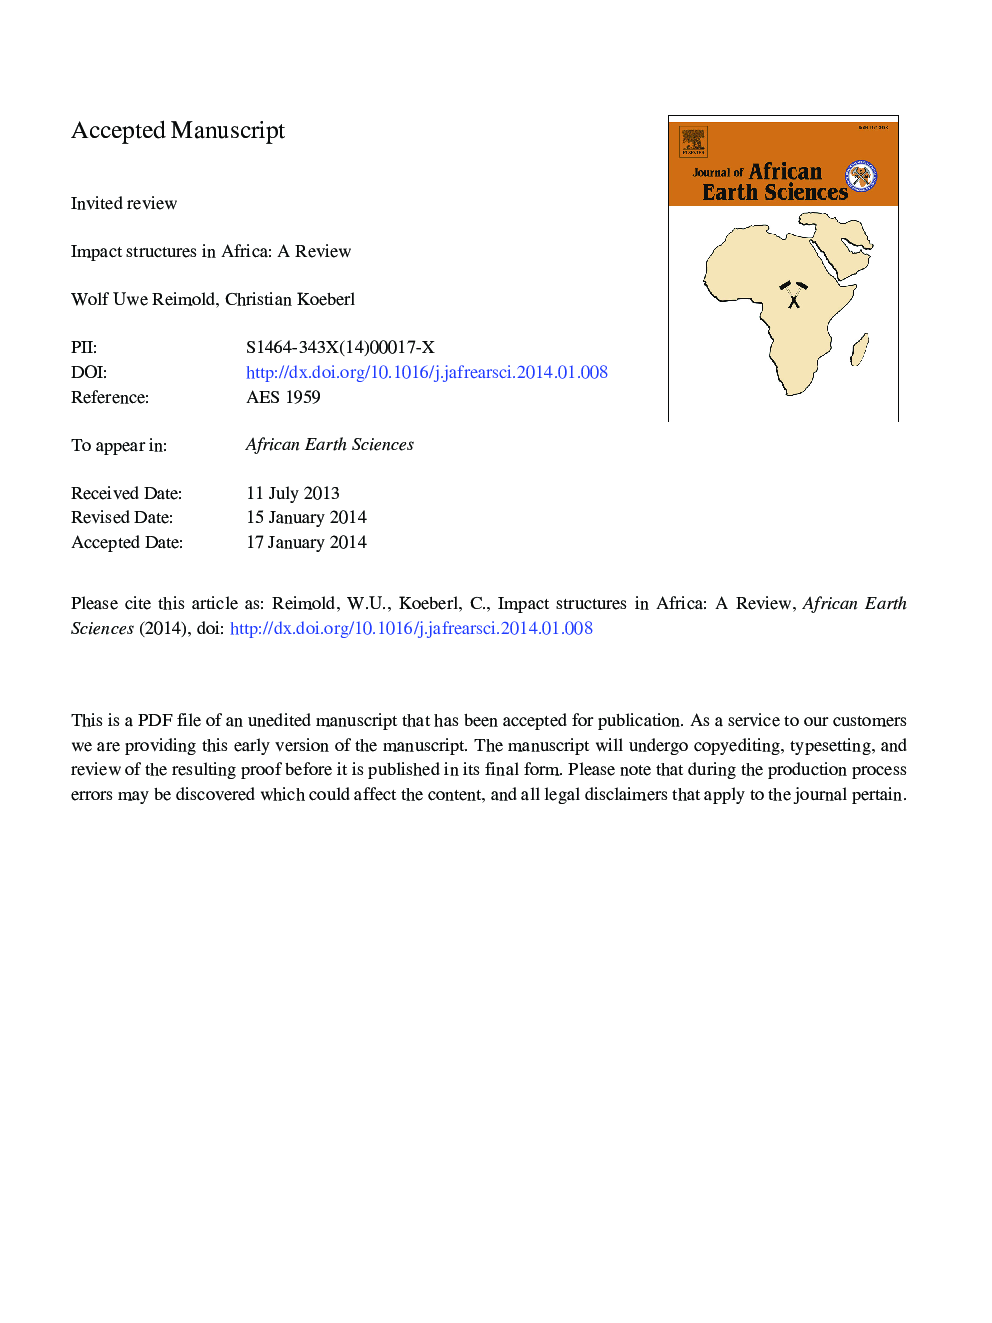 Impact structures in Africa: A review